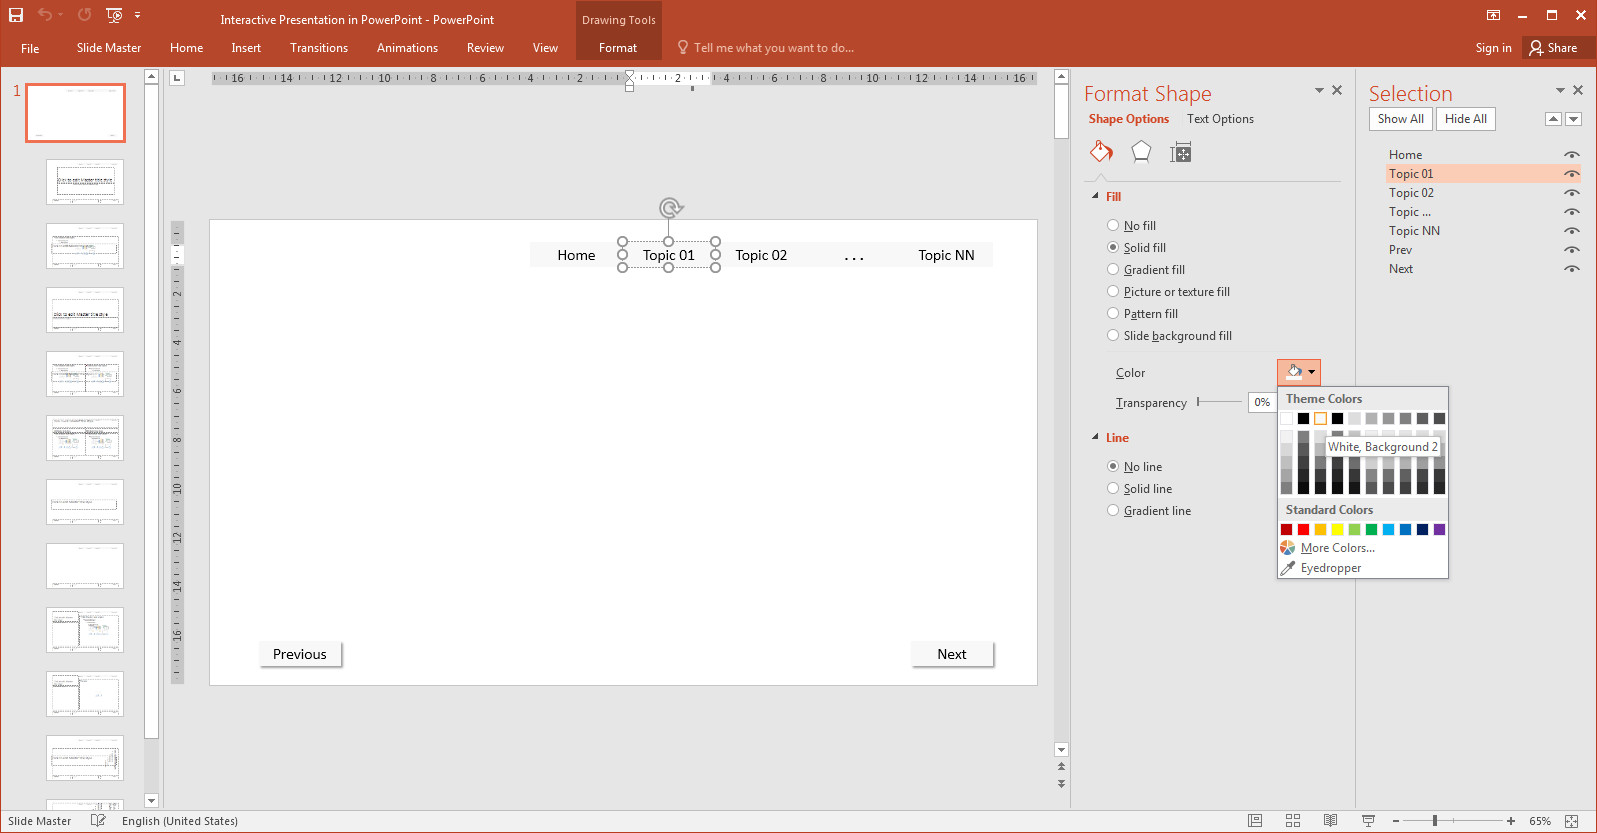 Making an Interactive Presentation in PowerPoint: The tab bar and the navigation buttons should be located on each slide